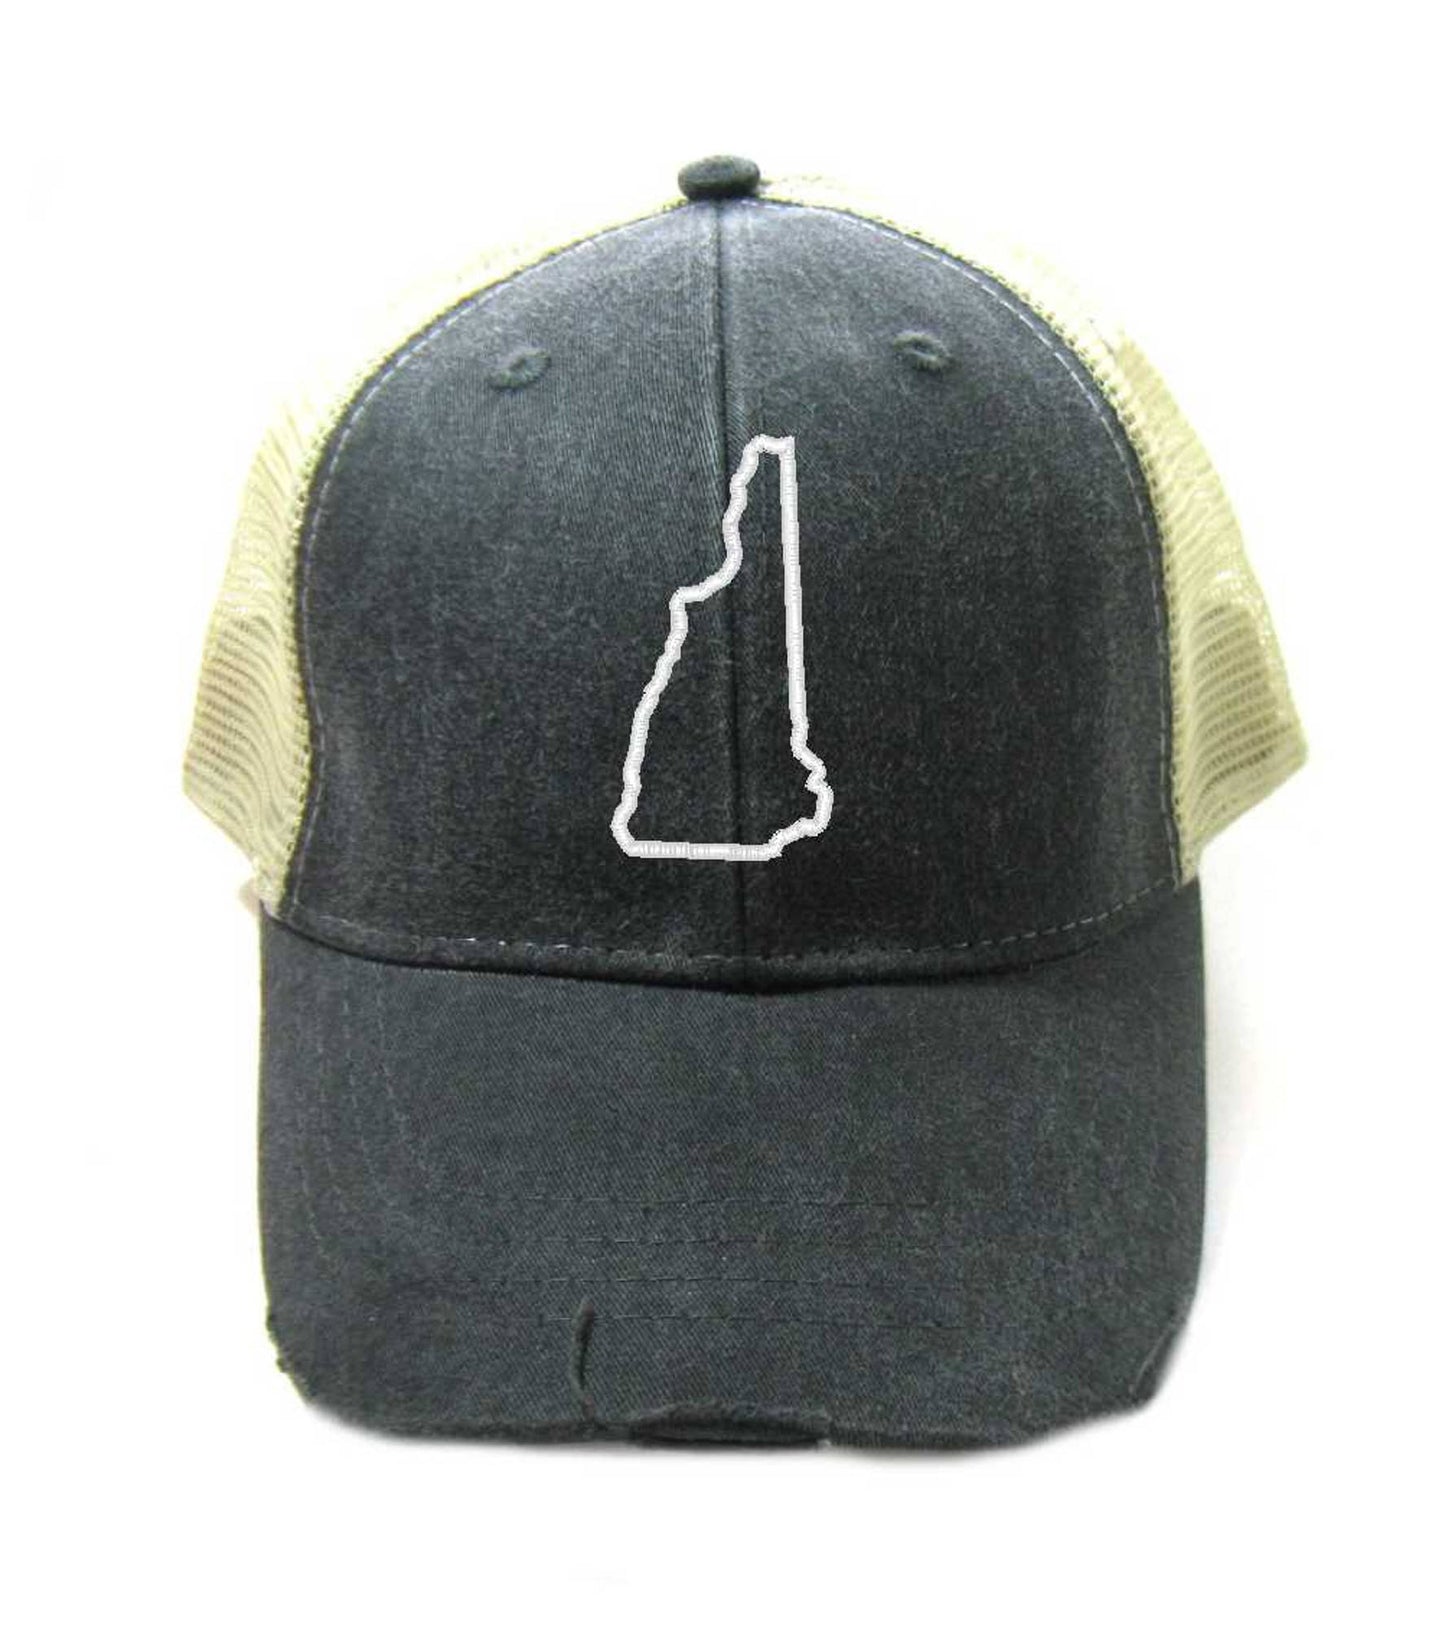 New Hampshire Hat - Distressed Snapback Trucker Hat - New Hampshire State Outline - Many Colors Available